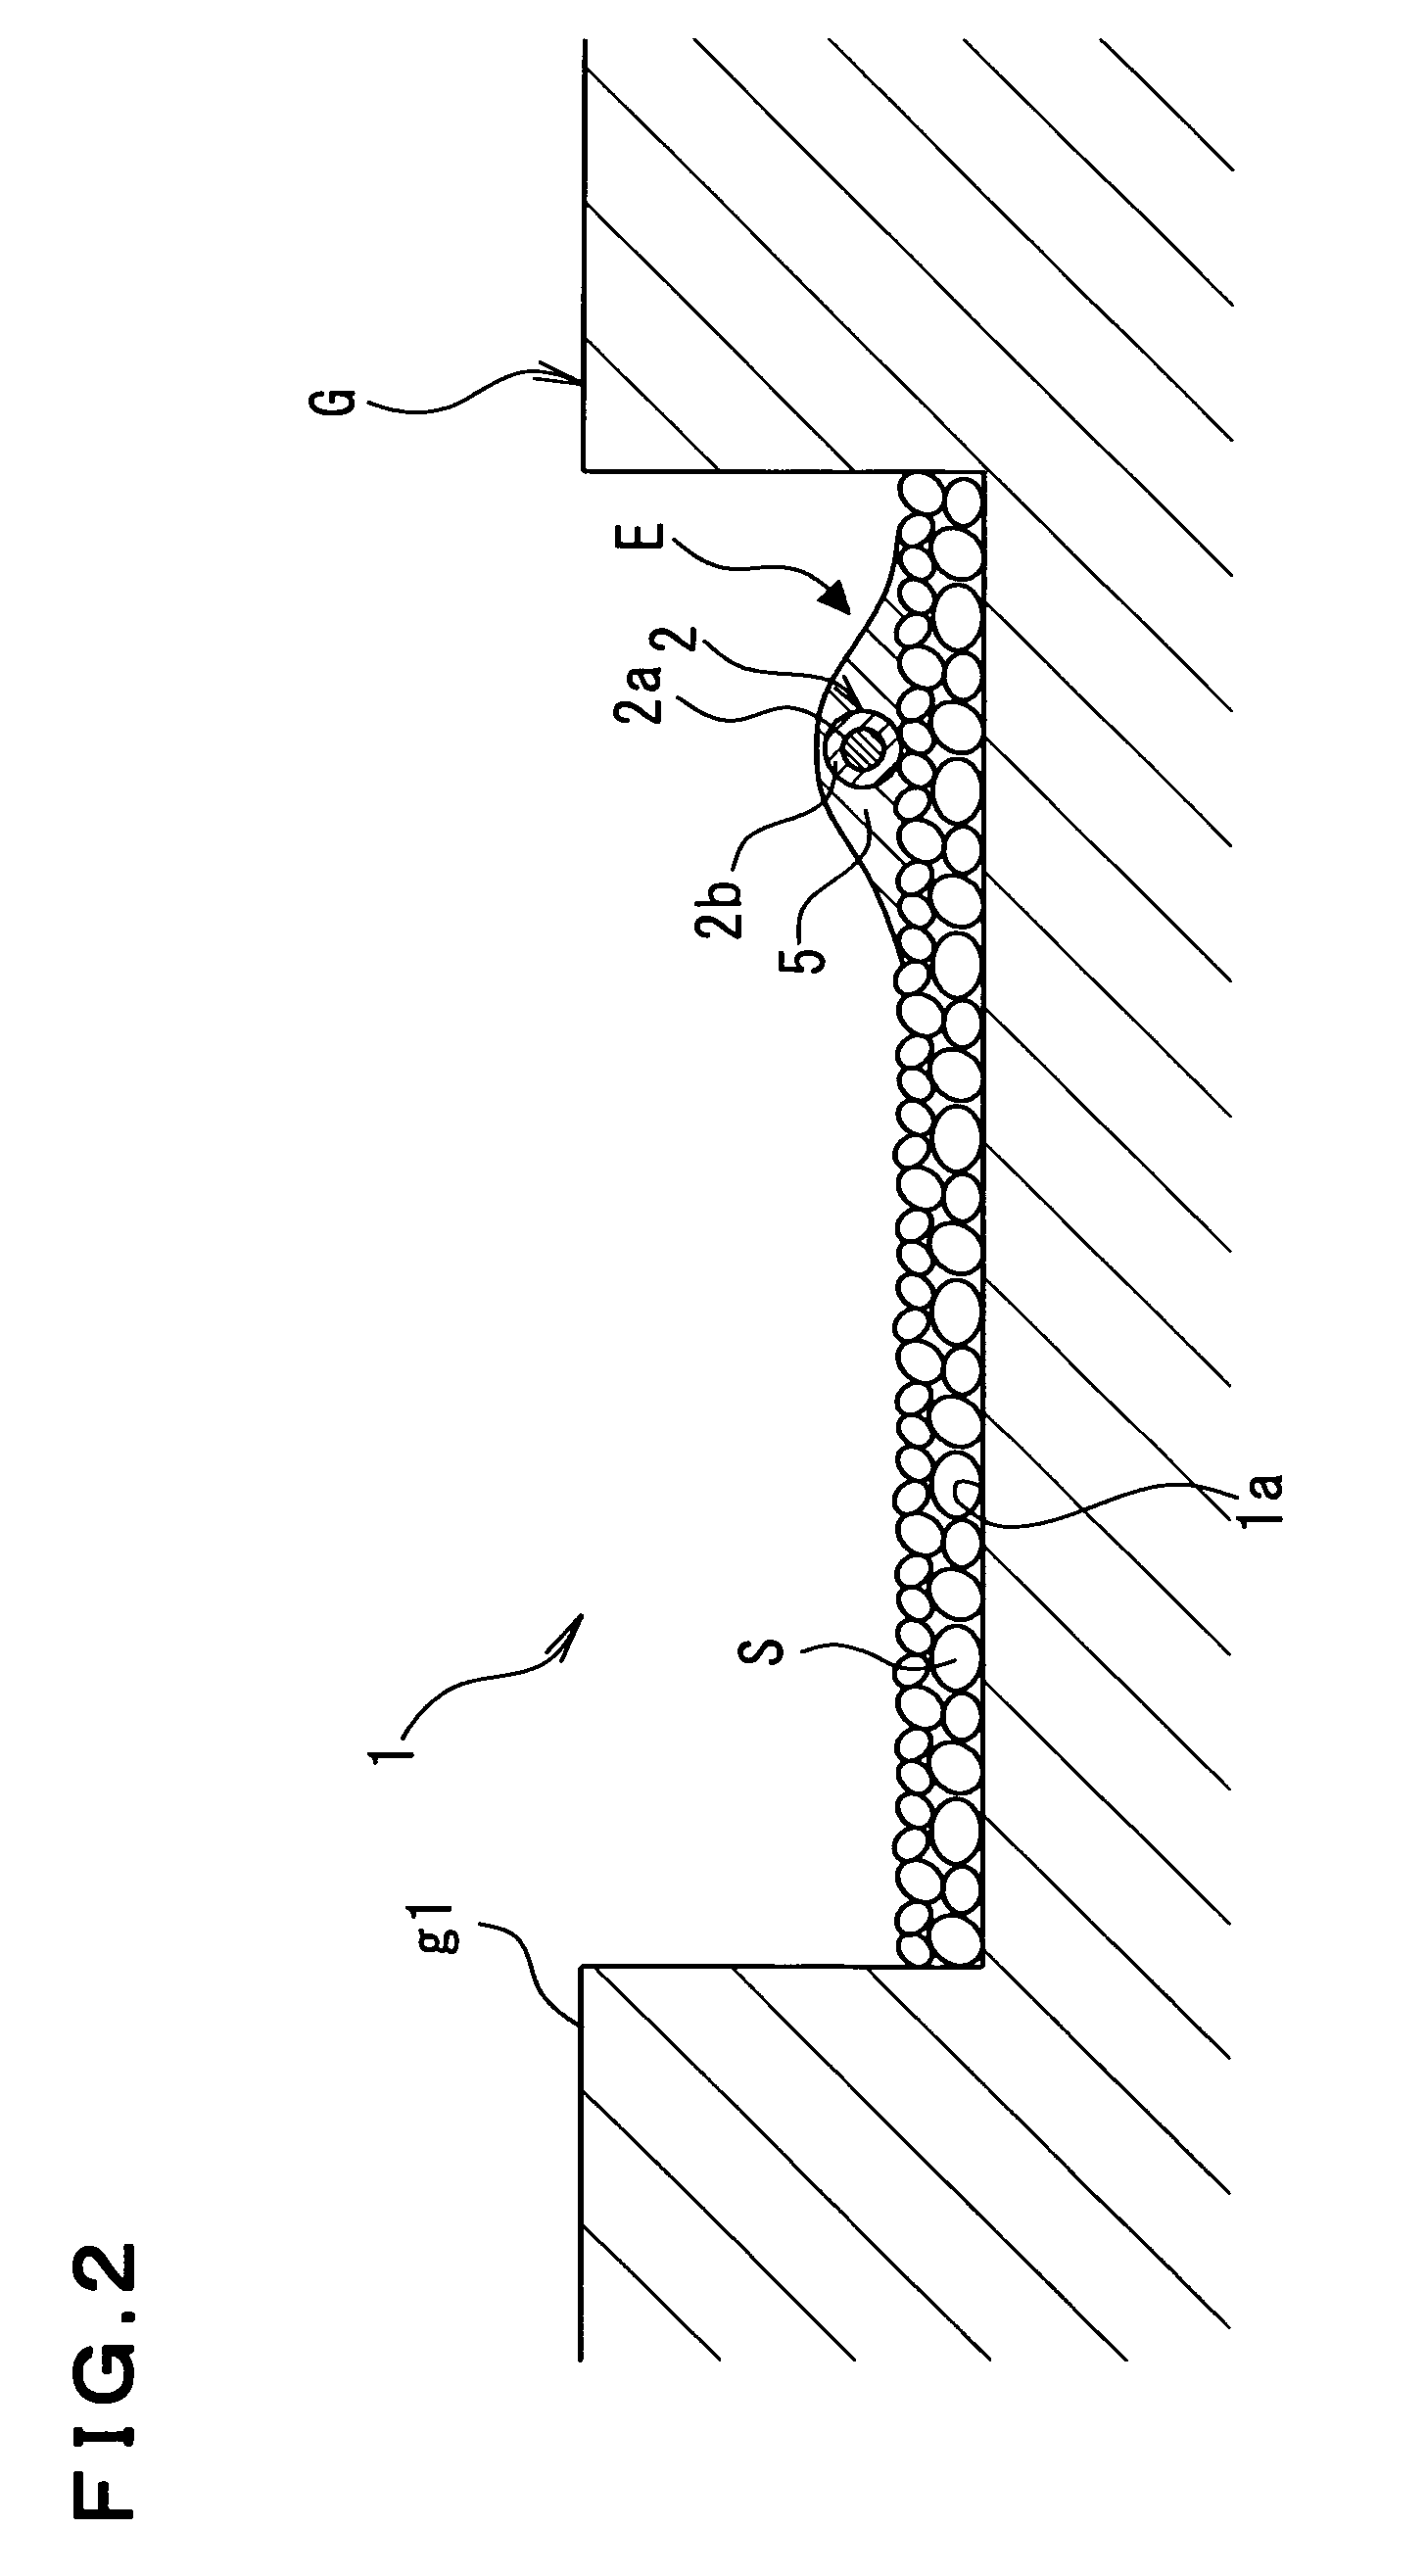 Grounding device and method of constructing the same